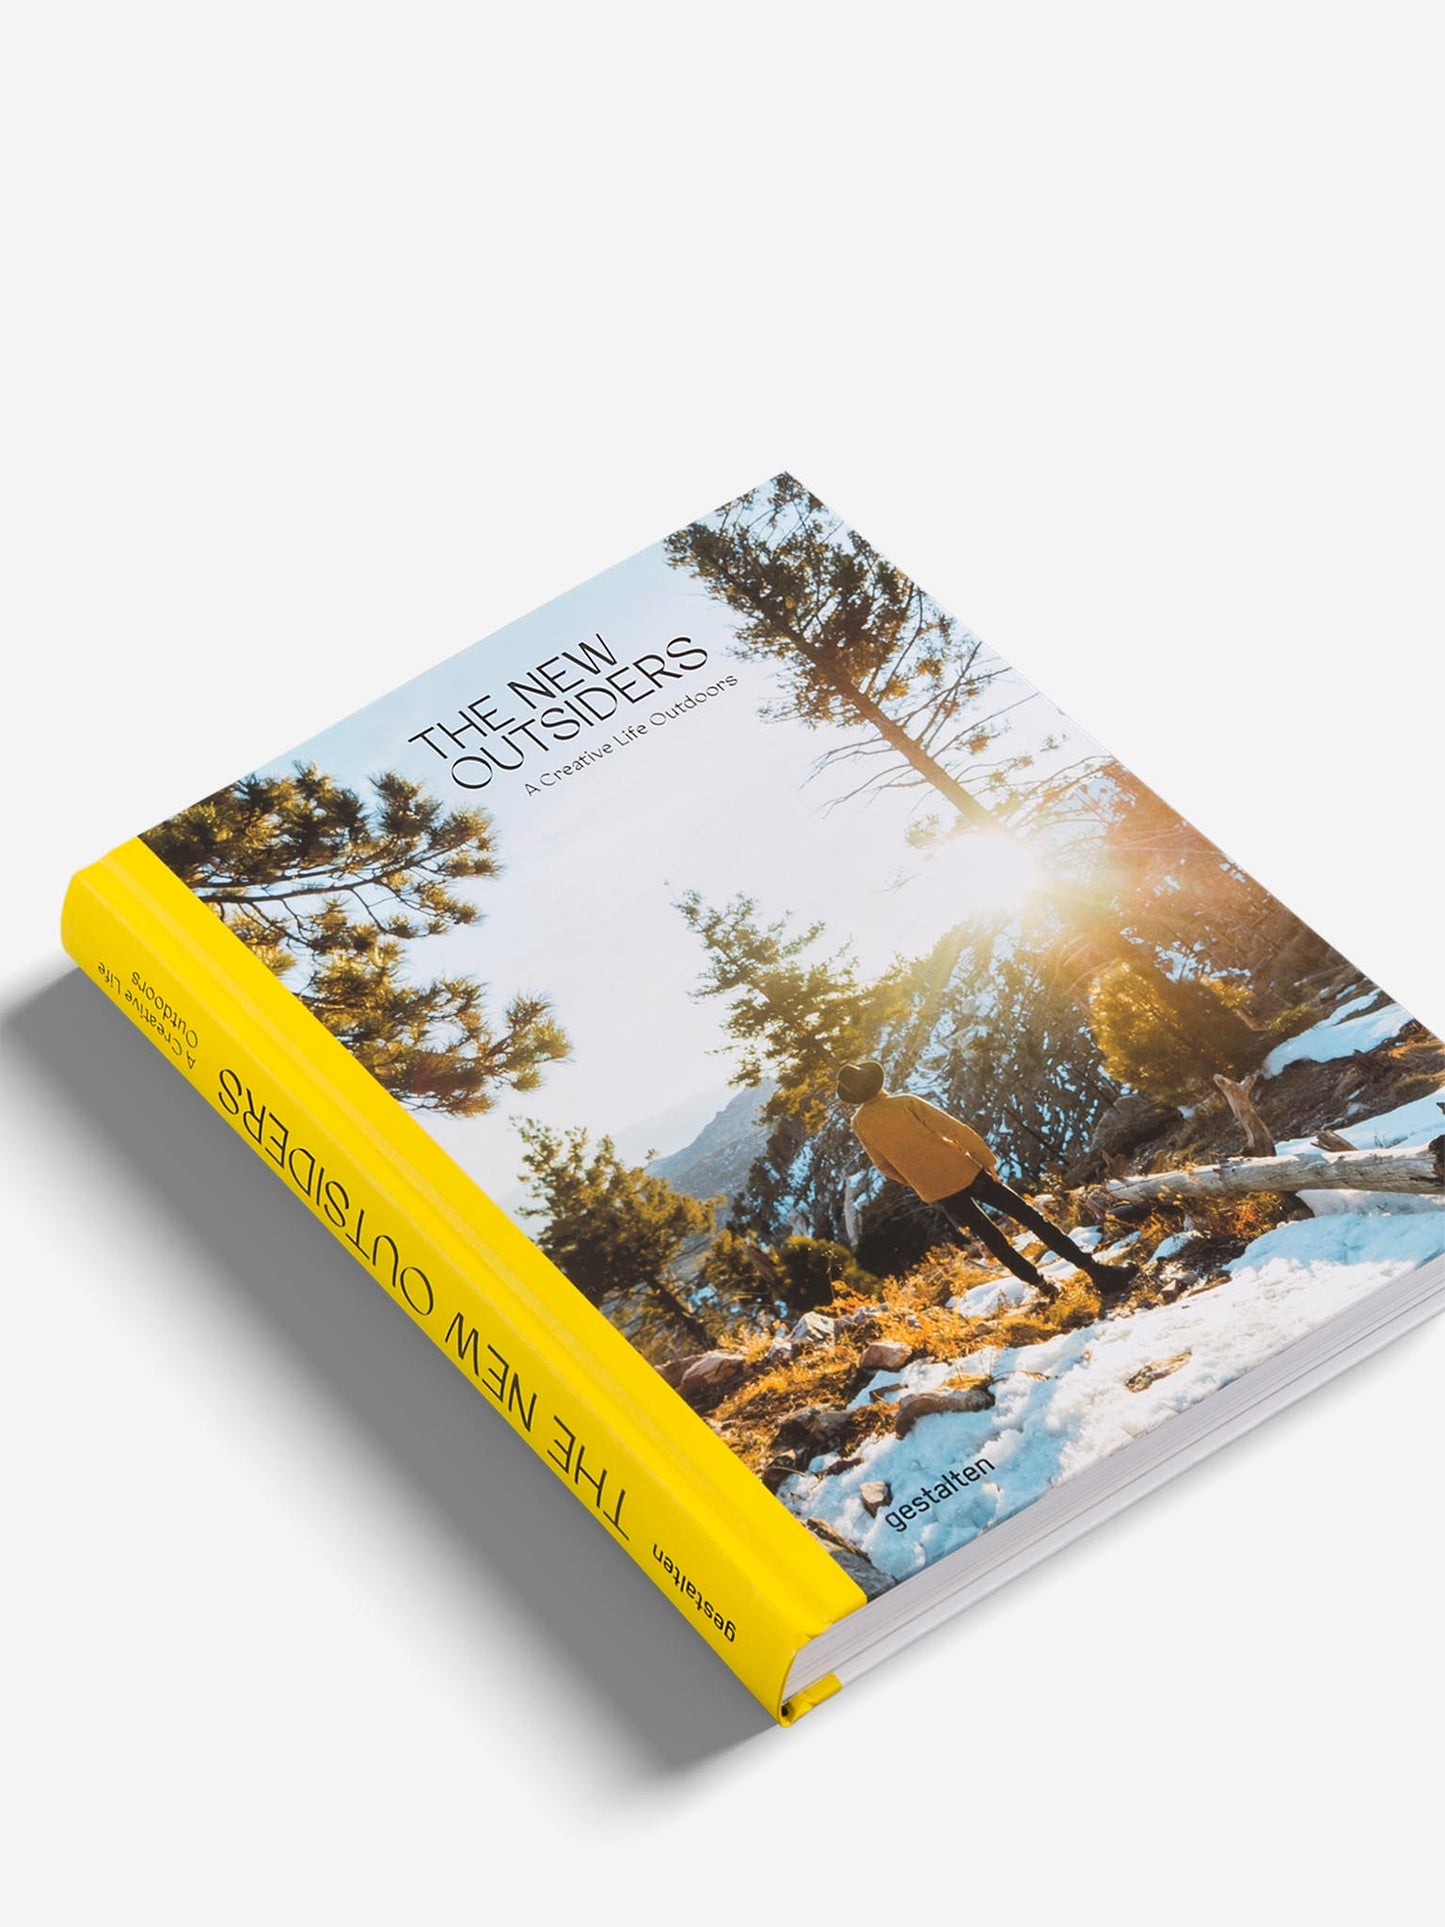 Gestalten The New Outsiders A Creative Life Outdoors Book